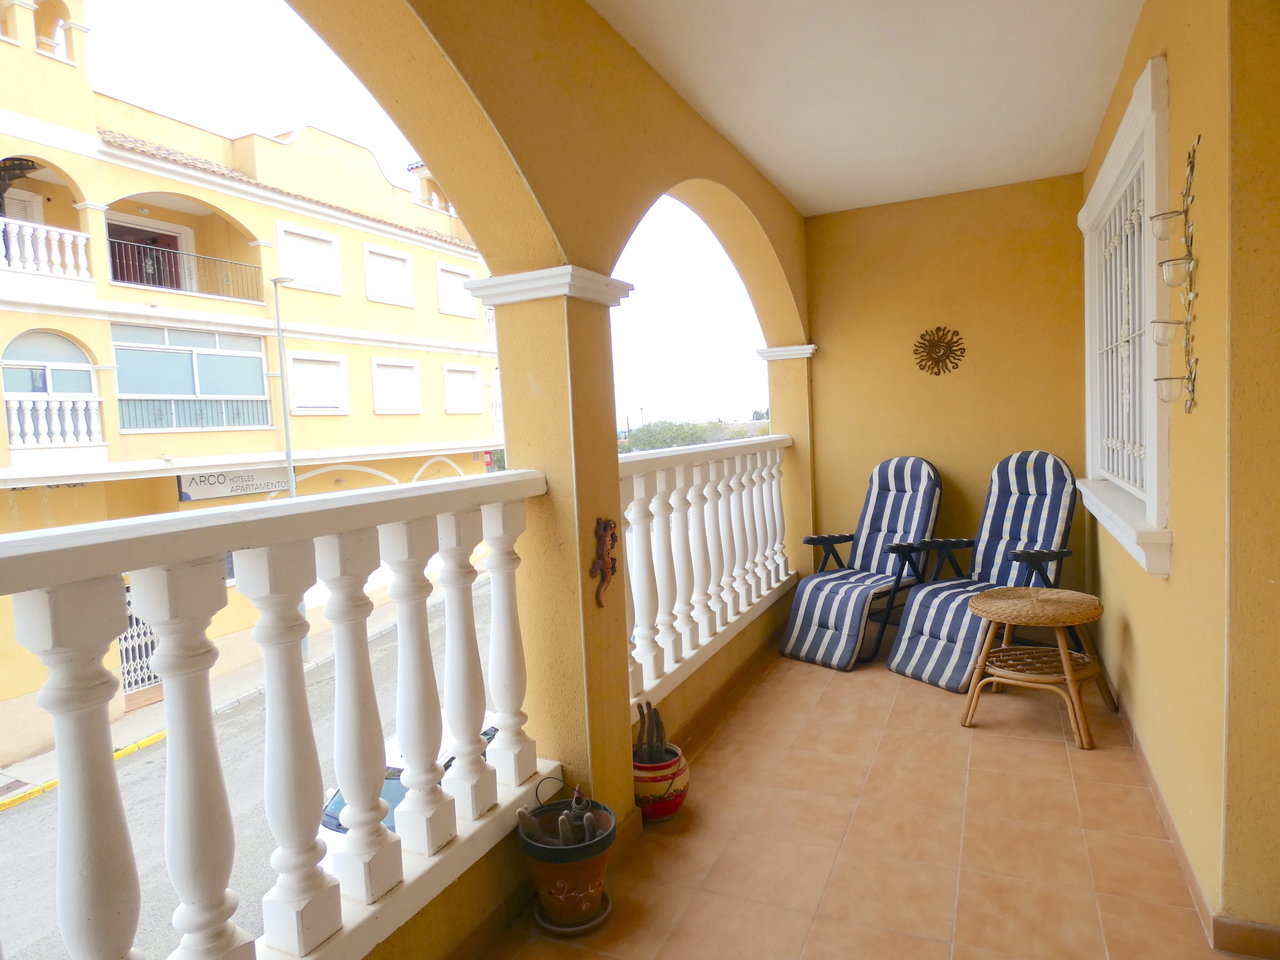 For Sale: Apartment in Algorfa Beds: 2 Baths: 1 Price: 89,995€